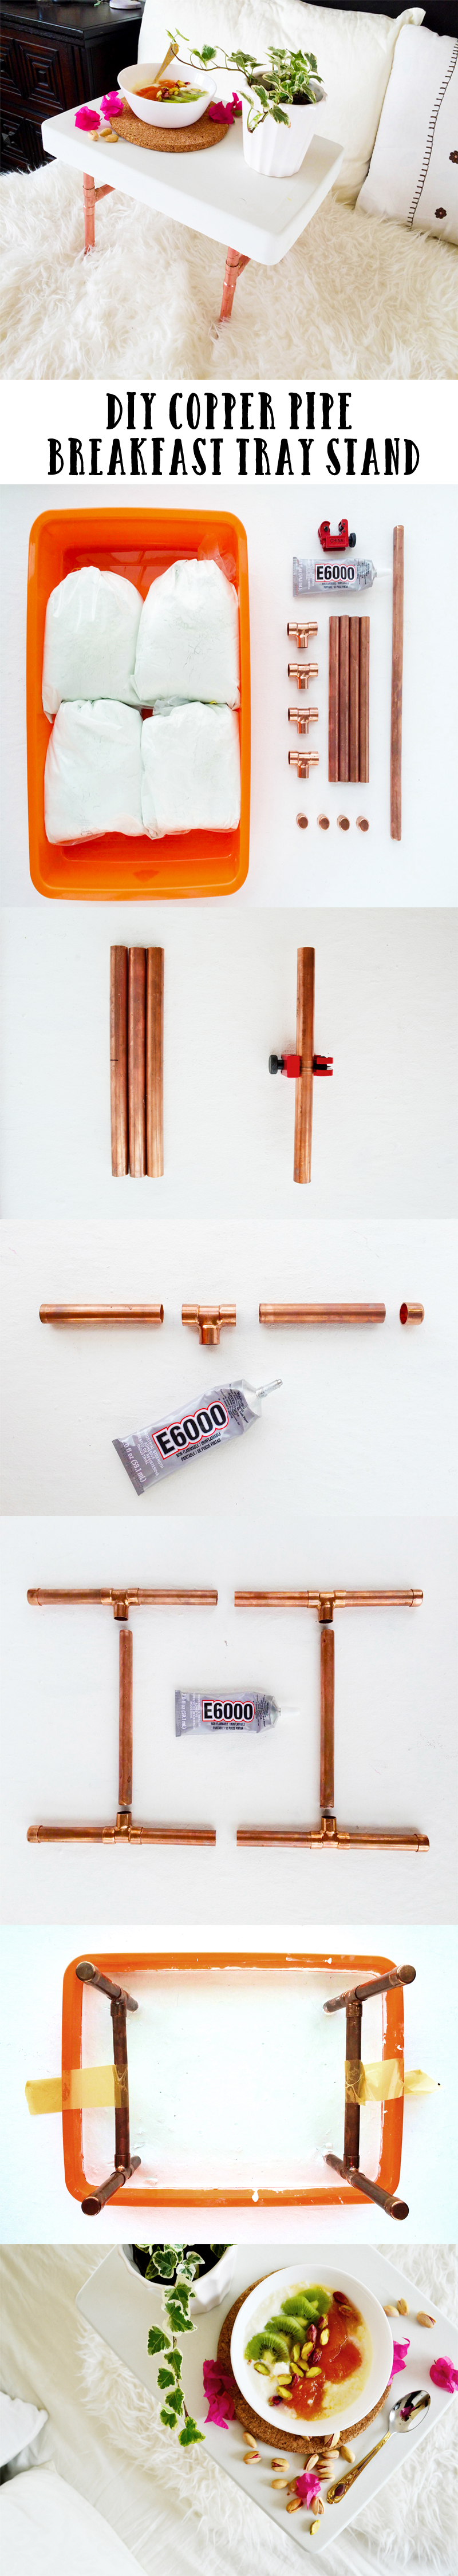 DIY Copper Pipe Breakfast Tray Stand 